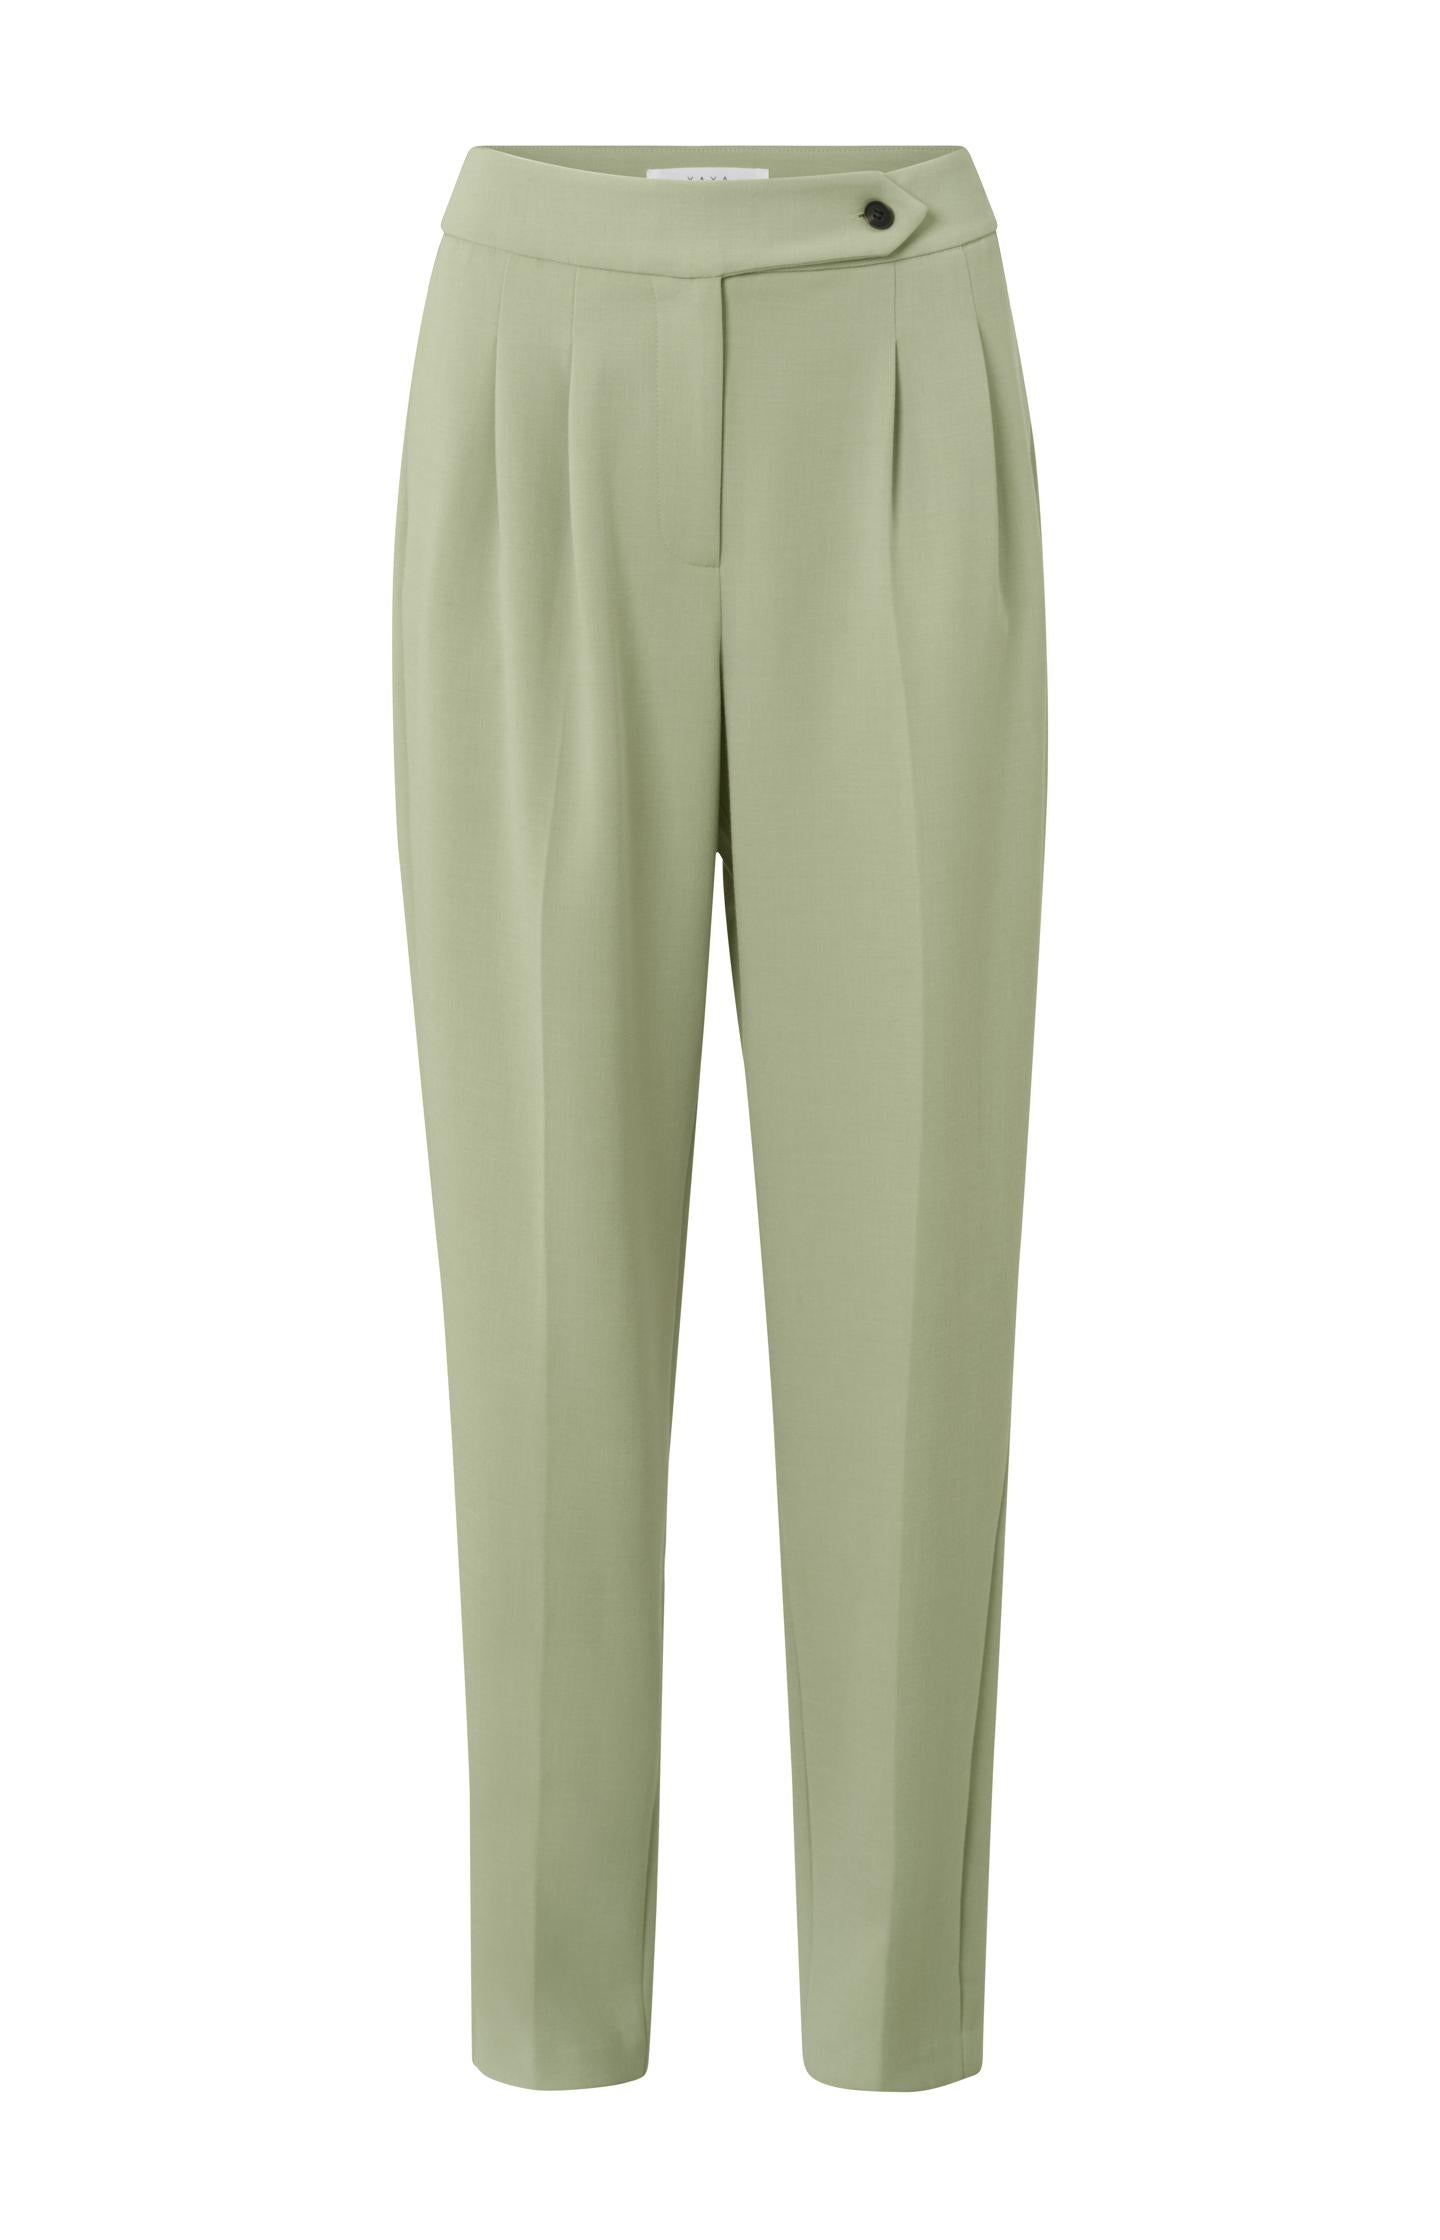 High waist trousers with pleated details and side pockets - Type: product